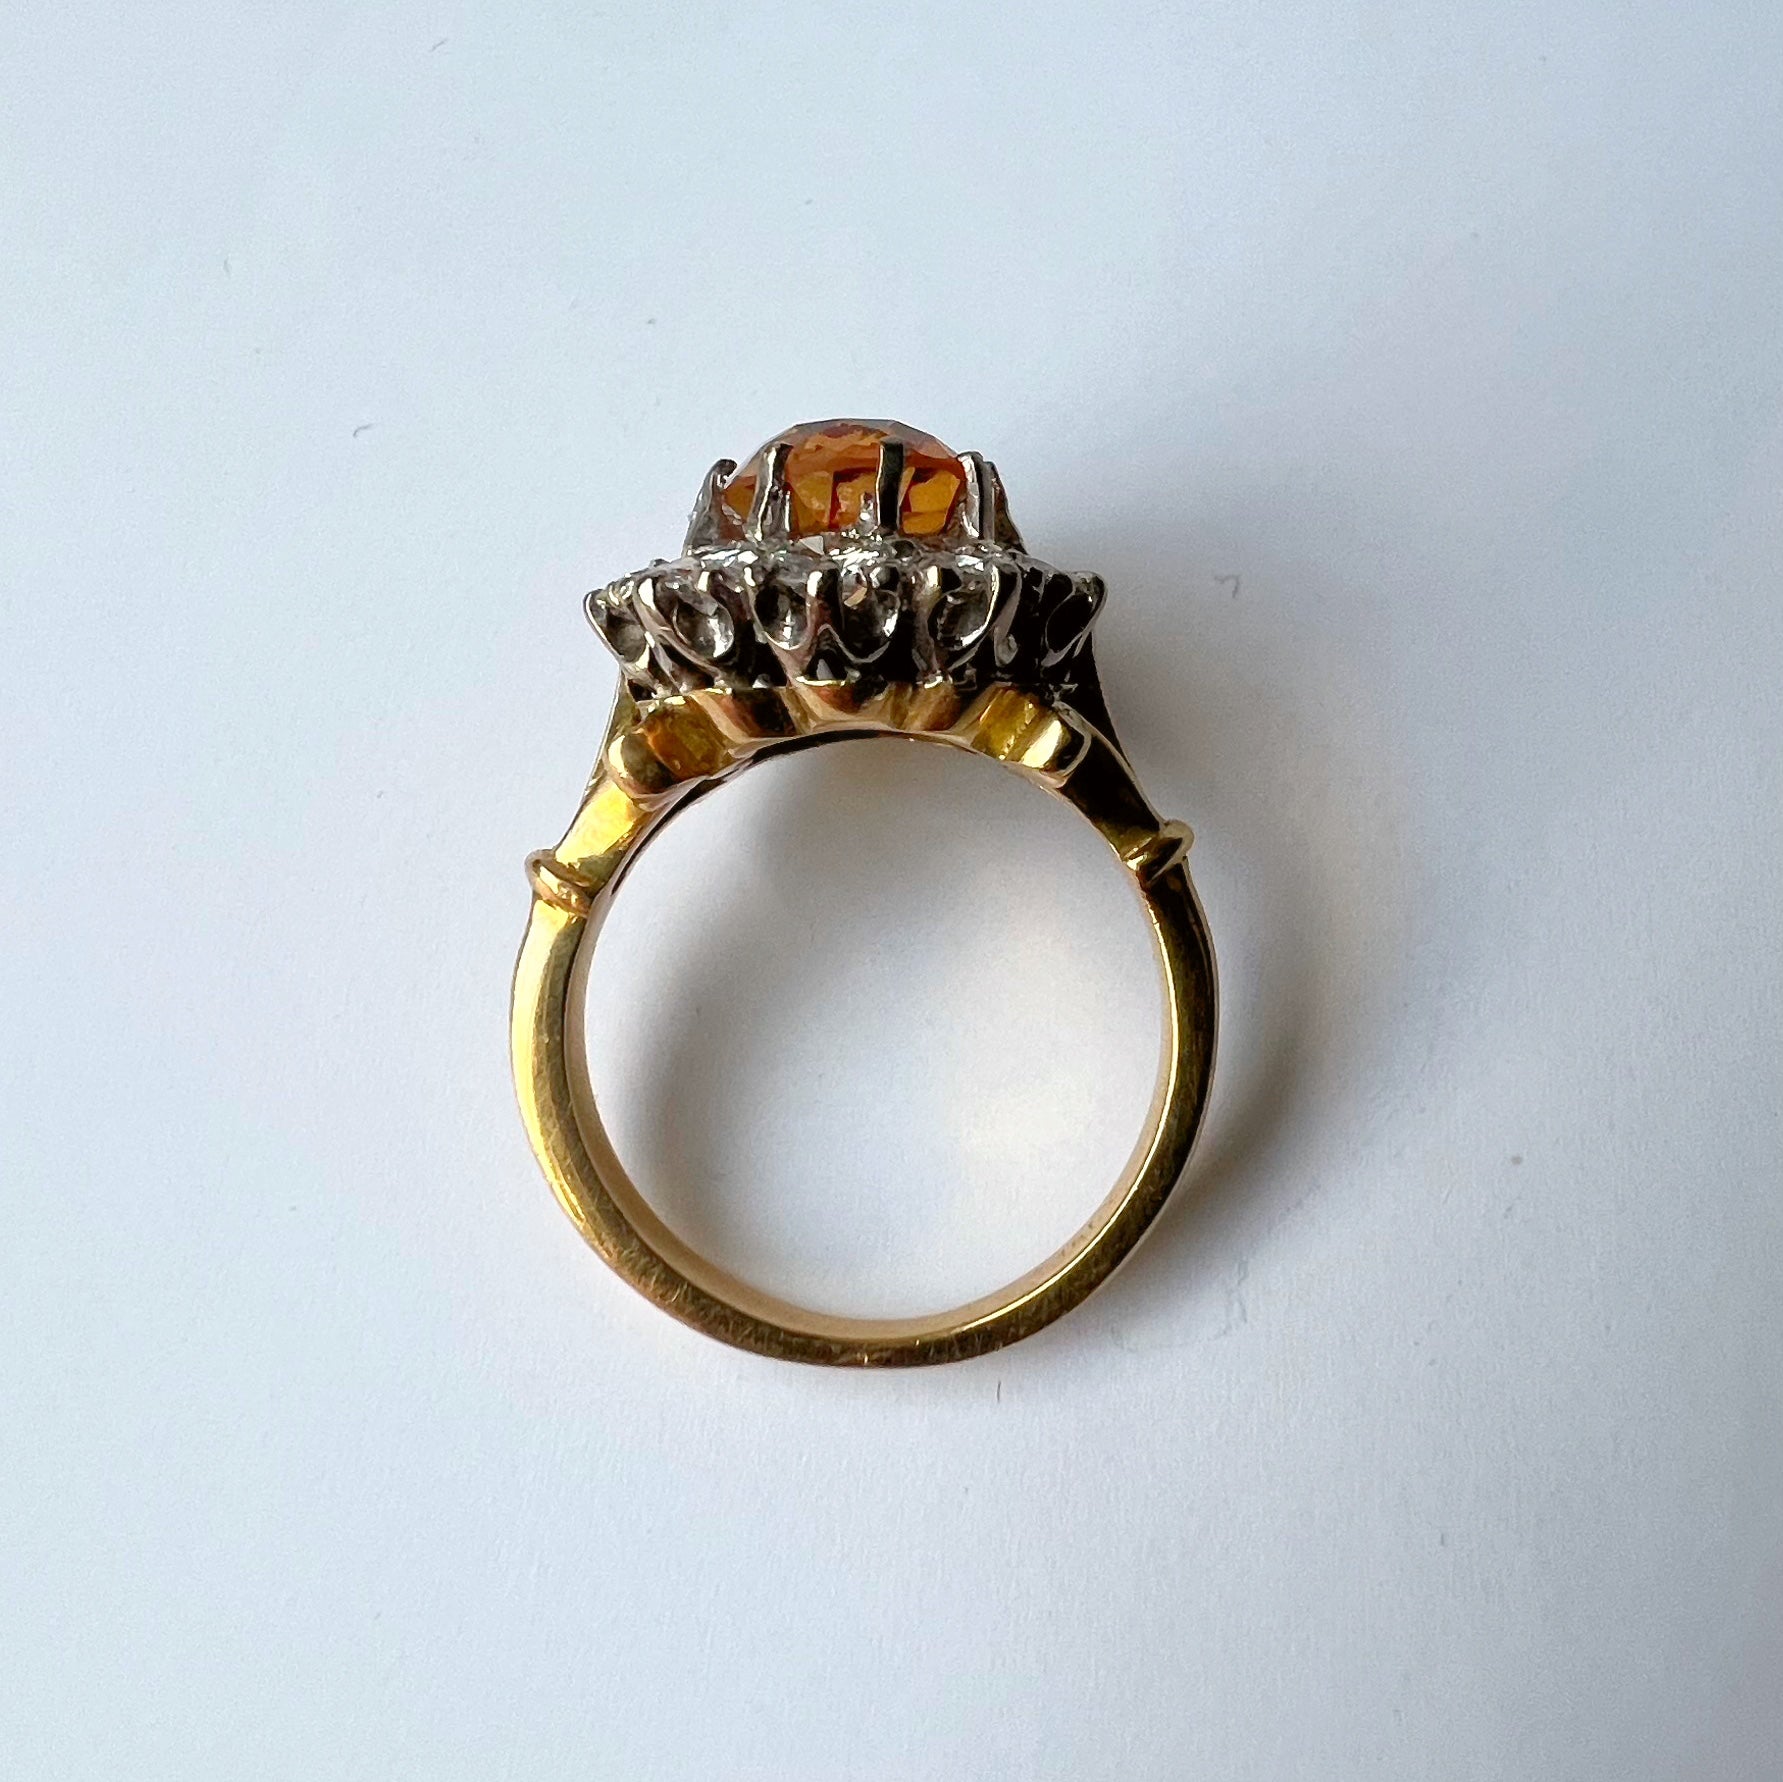 Vintage Golden Topaz and 1.20ct Diamond Cluster Ring